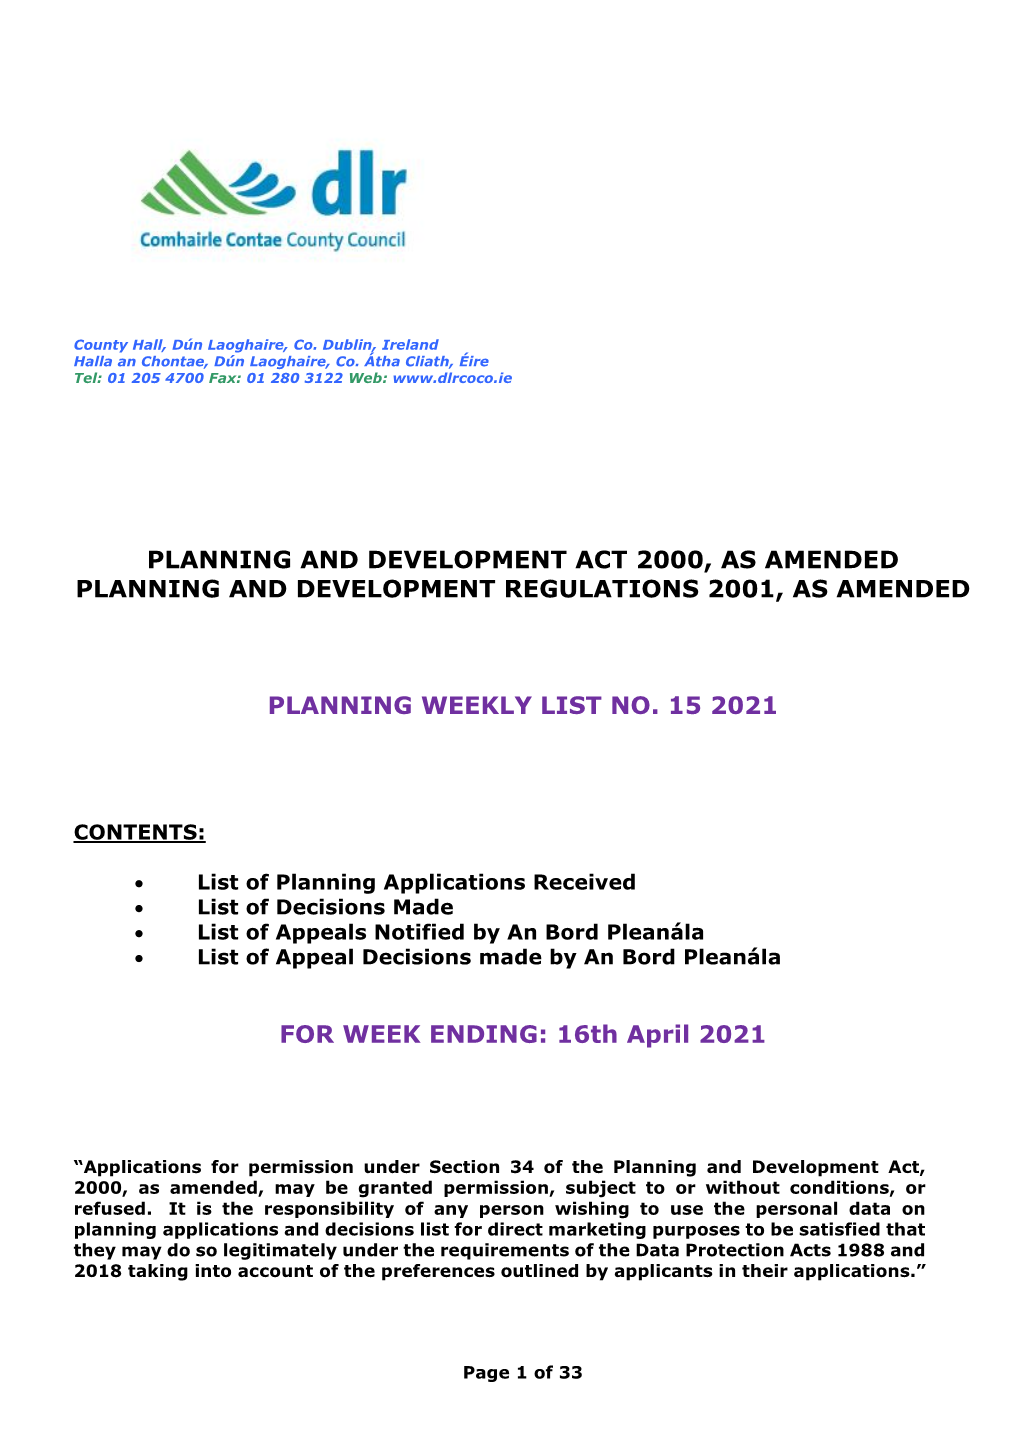 Planning and Development Act 2000, As Amended Planning and Development Regulations 2001, As Amended Planning Weekly List No. 15